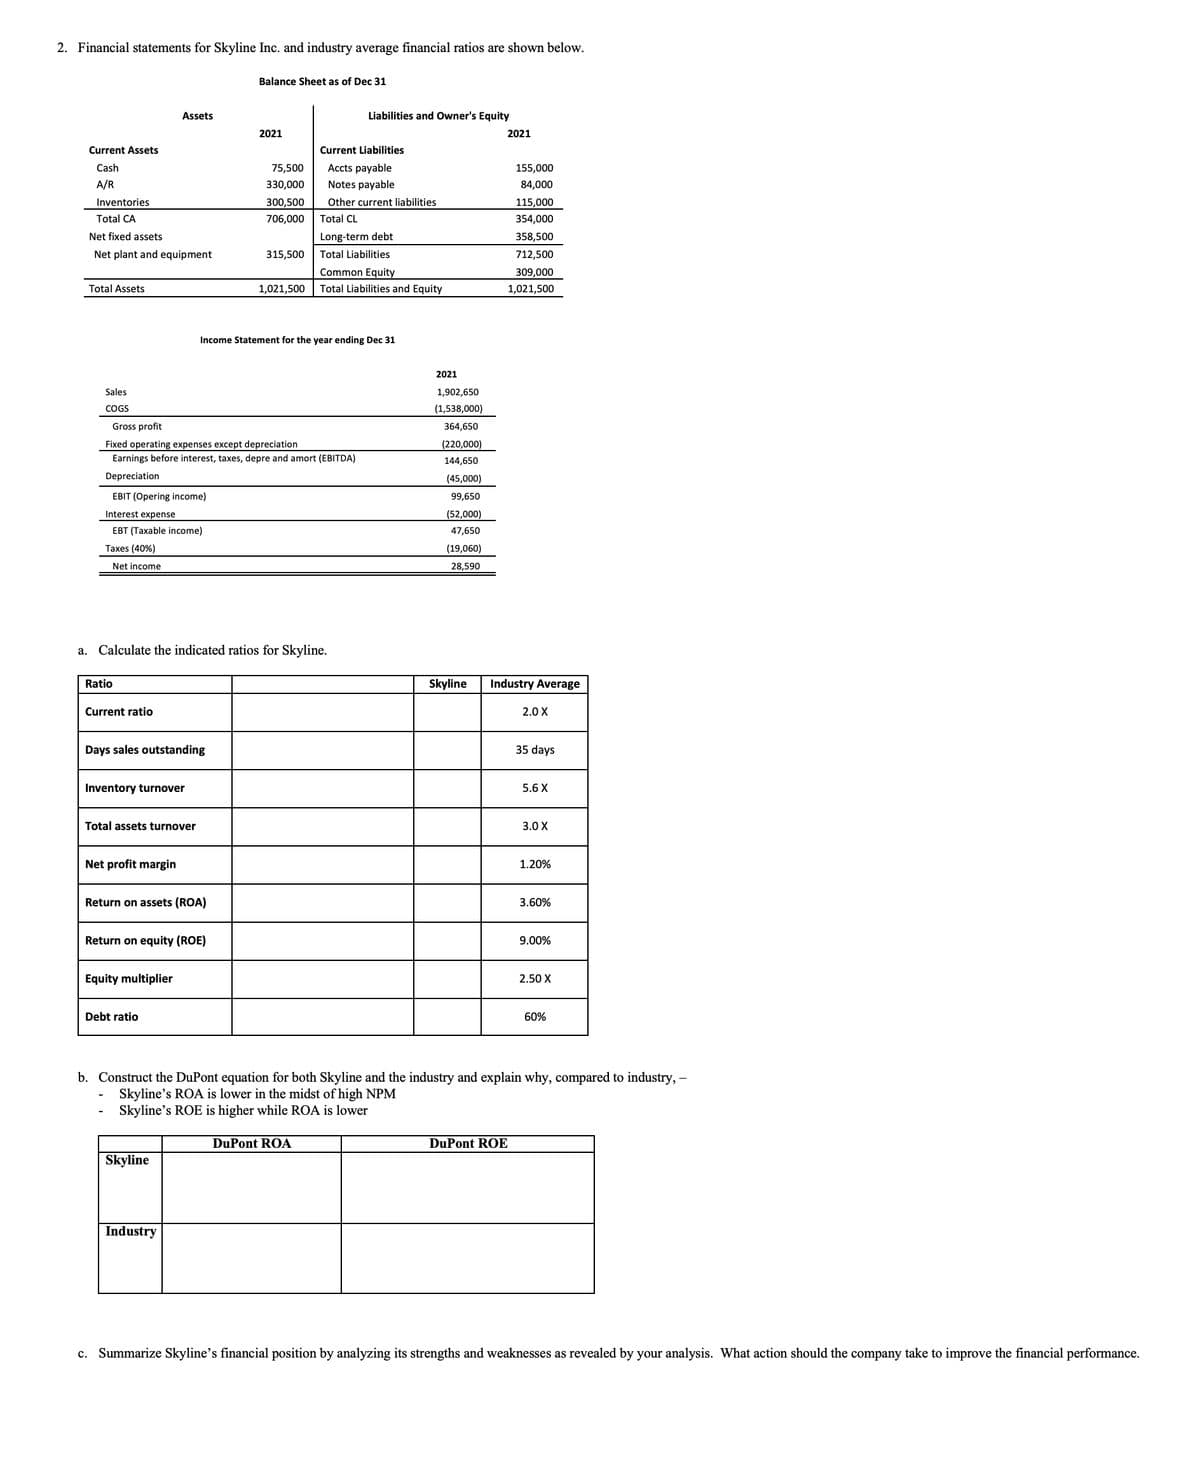 2. Financial statements for Skyline Inc. and industry average financial ratios are shown below.
Current Assets
Cash
A/R
Inventories
Total CA
Net fixed assets
Net plant and equipment
Total Assets
Sales
COGS
Net income
EBIT (Opering income)
Interest expense
EBT (Taxable income)
Taxes (40%)
Ratio
Current ratio
Assets
Days sales outstanding
Inventory turnover
Gross profit
Fixed operating expenses except depreciation
Earnings before interest, taxes, depre and amort (EBITDA)
Depreciation
Total assets turnover
Net profit margin
a. Calculate the indicated ratios for Skyline.
Return on assets (ROA)
Equity multiplier
Return on equity (ROE)
Debt ratio
Balance Sheet as of Dec 31
Skyline
2021
Industry
75,500
330,000
300,500
706,000
315,500
Income Statement for the year ending Dec 31
1,021,500
Current Liabilities
Accts payable
Notes payable
Other current liabilities
Total CL
Long-term debt
Total Liabilities
Common Equity
Total Liabilities and Equity
Liabilities and Owner's Equity
DuPont ROA
2021
1,902,650
(1,538,000)
364,650
(220,000)
144,650
(45,000)
99,650
(52,000)
47,650
(19,060)
28,590
Skyline
2021
155,000
84,000
115,000
354,000
358,500
712,500
309,000
1,021,500
DuPont ROE
Industry Average
2.0 X
35 days
5.6 X
3.0 X
1.20%
3.60%
b. Construct the DuPont equation for both Skyline and the industry and explain why, compared to industry, -
Skyline's ROA is lower in the midst of high NPM
Skyline's ROE is higher while ROA is lower
9.00%
2.50 X
60%
c. Summarize Skyline's financial position by analyzing its strengths and weaknesses as revealed by your analysis. What action should the company take to improve the financial performance.